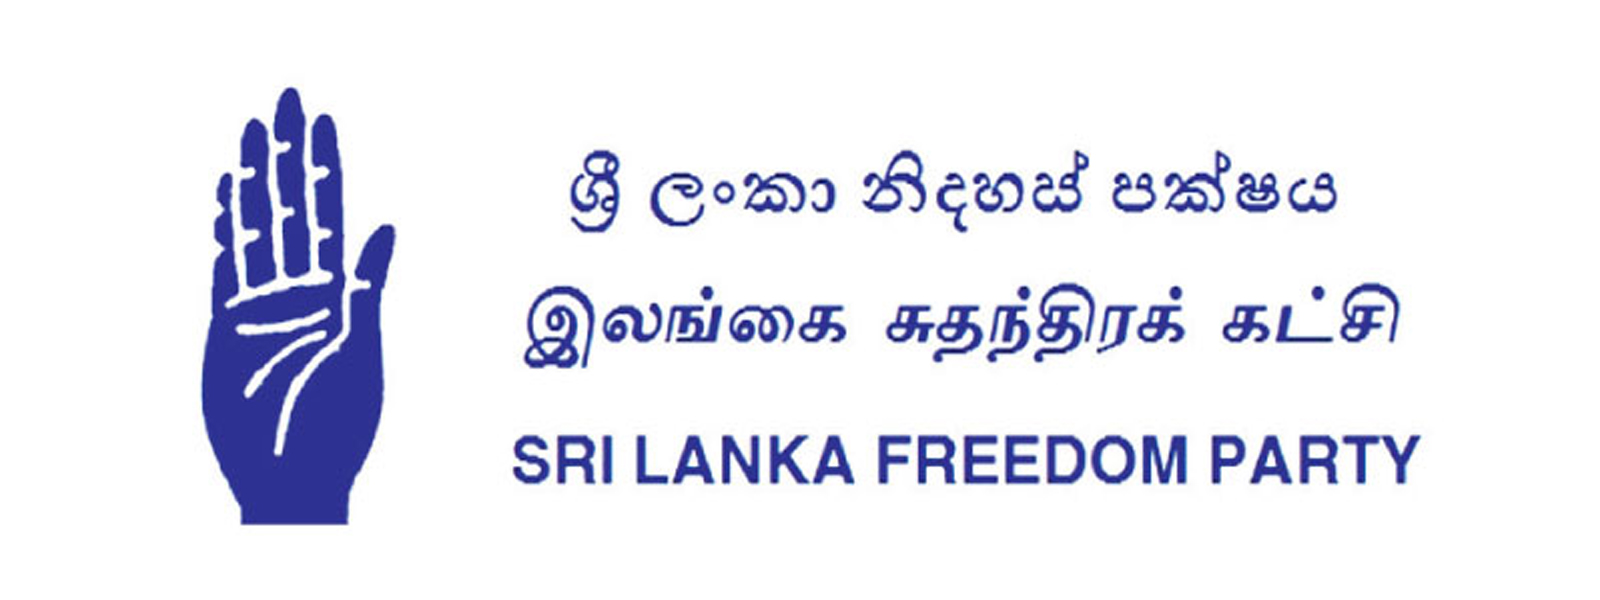 Disciplinary inquiry of SLFP to end this week